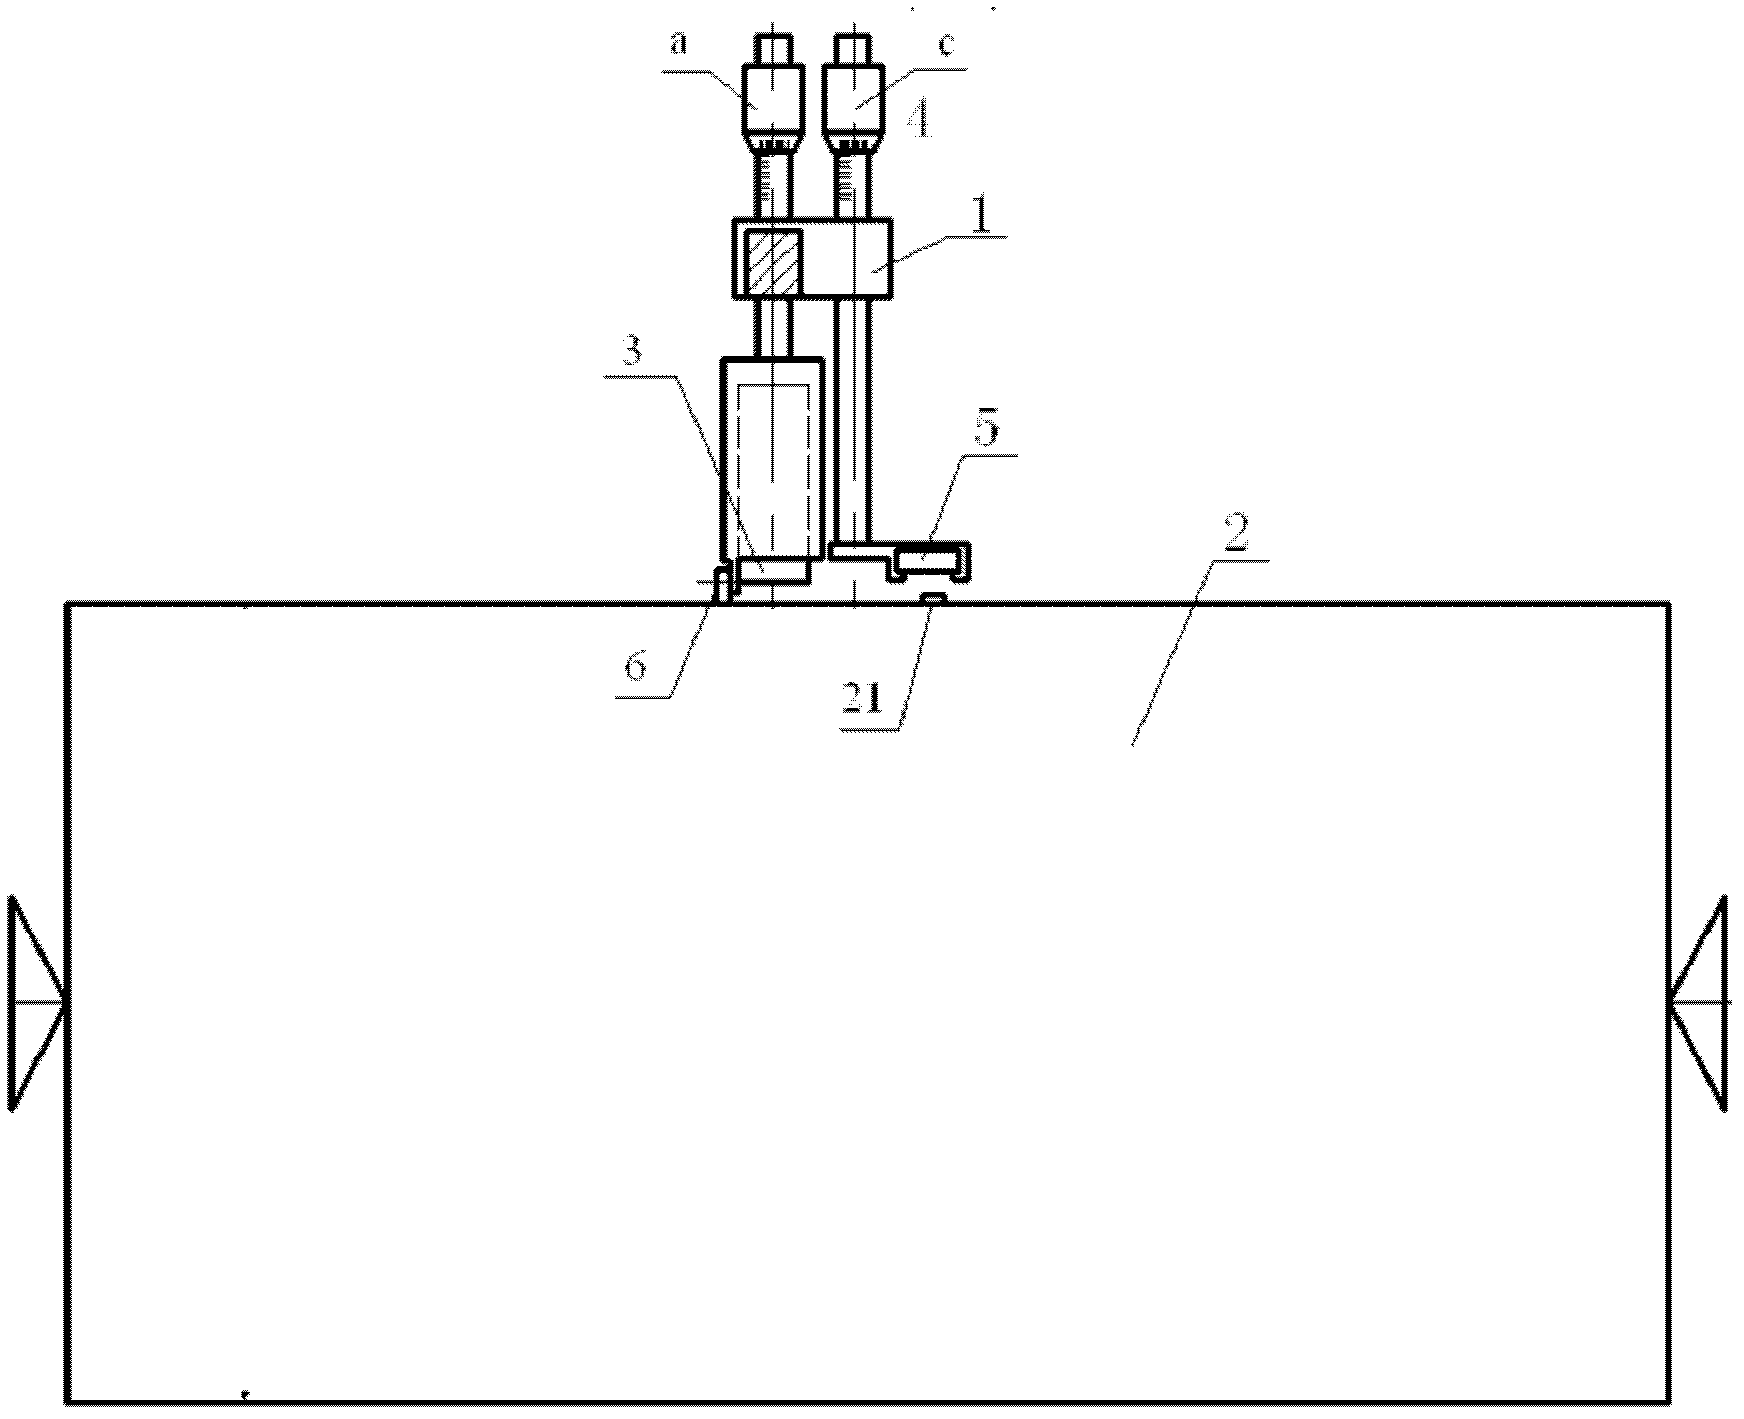 Measuring system for electrical runout amount of revolving body